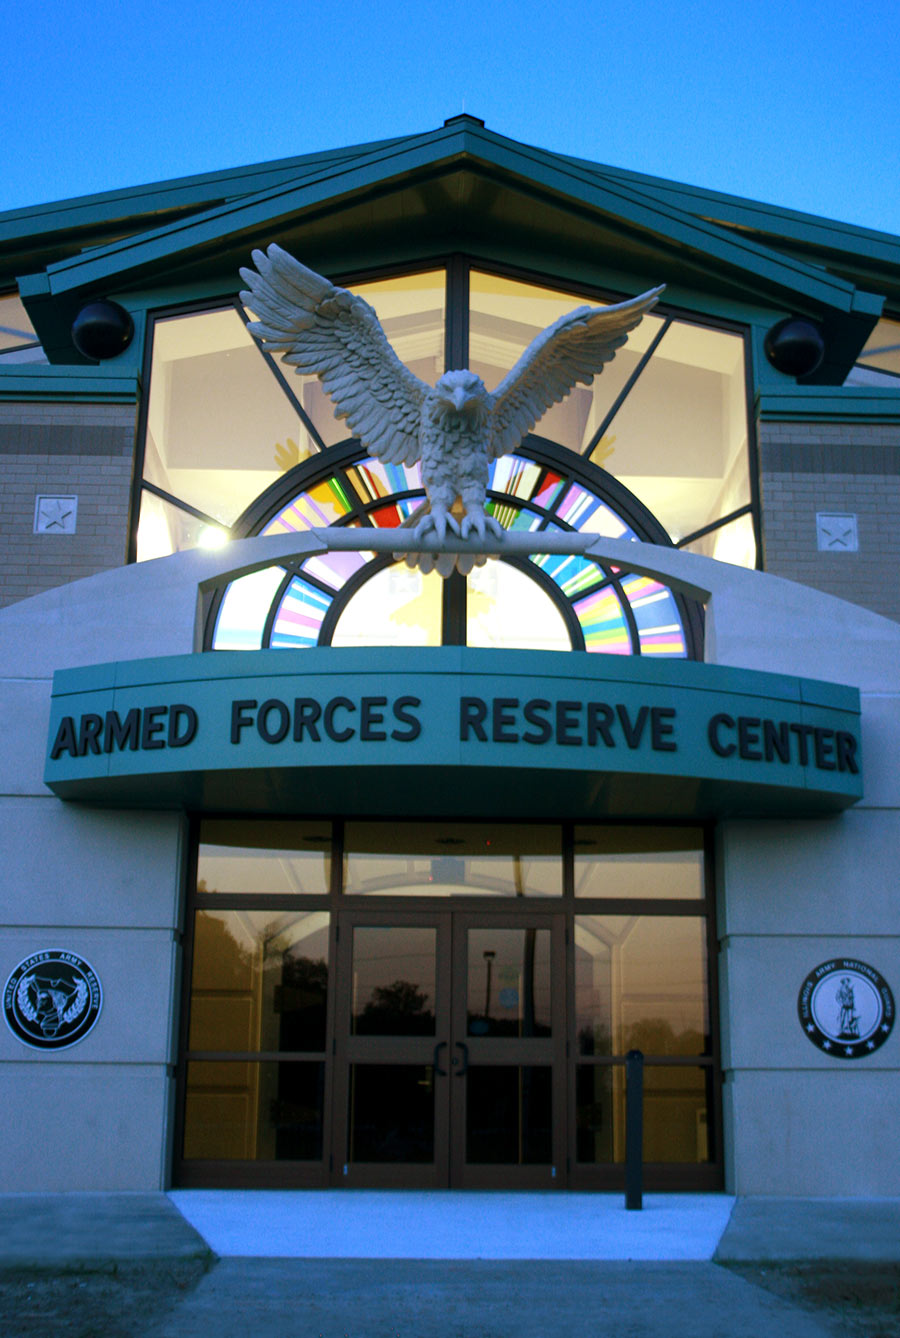 View of Main Entrance of The Armed Forces Reserve Center at Night in Mount Vernon, Illinois